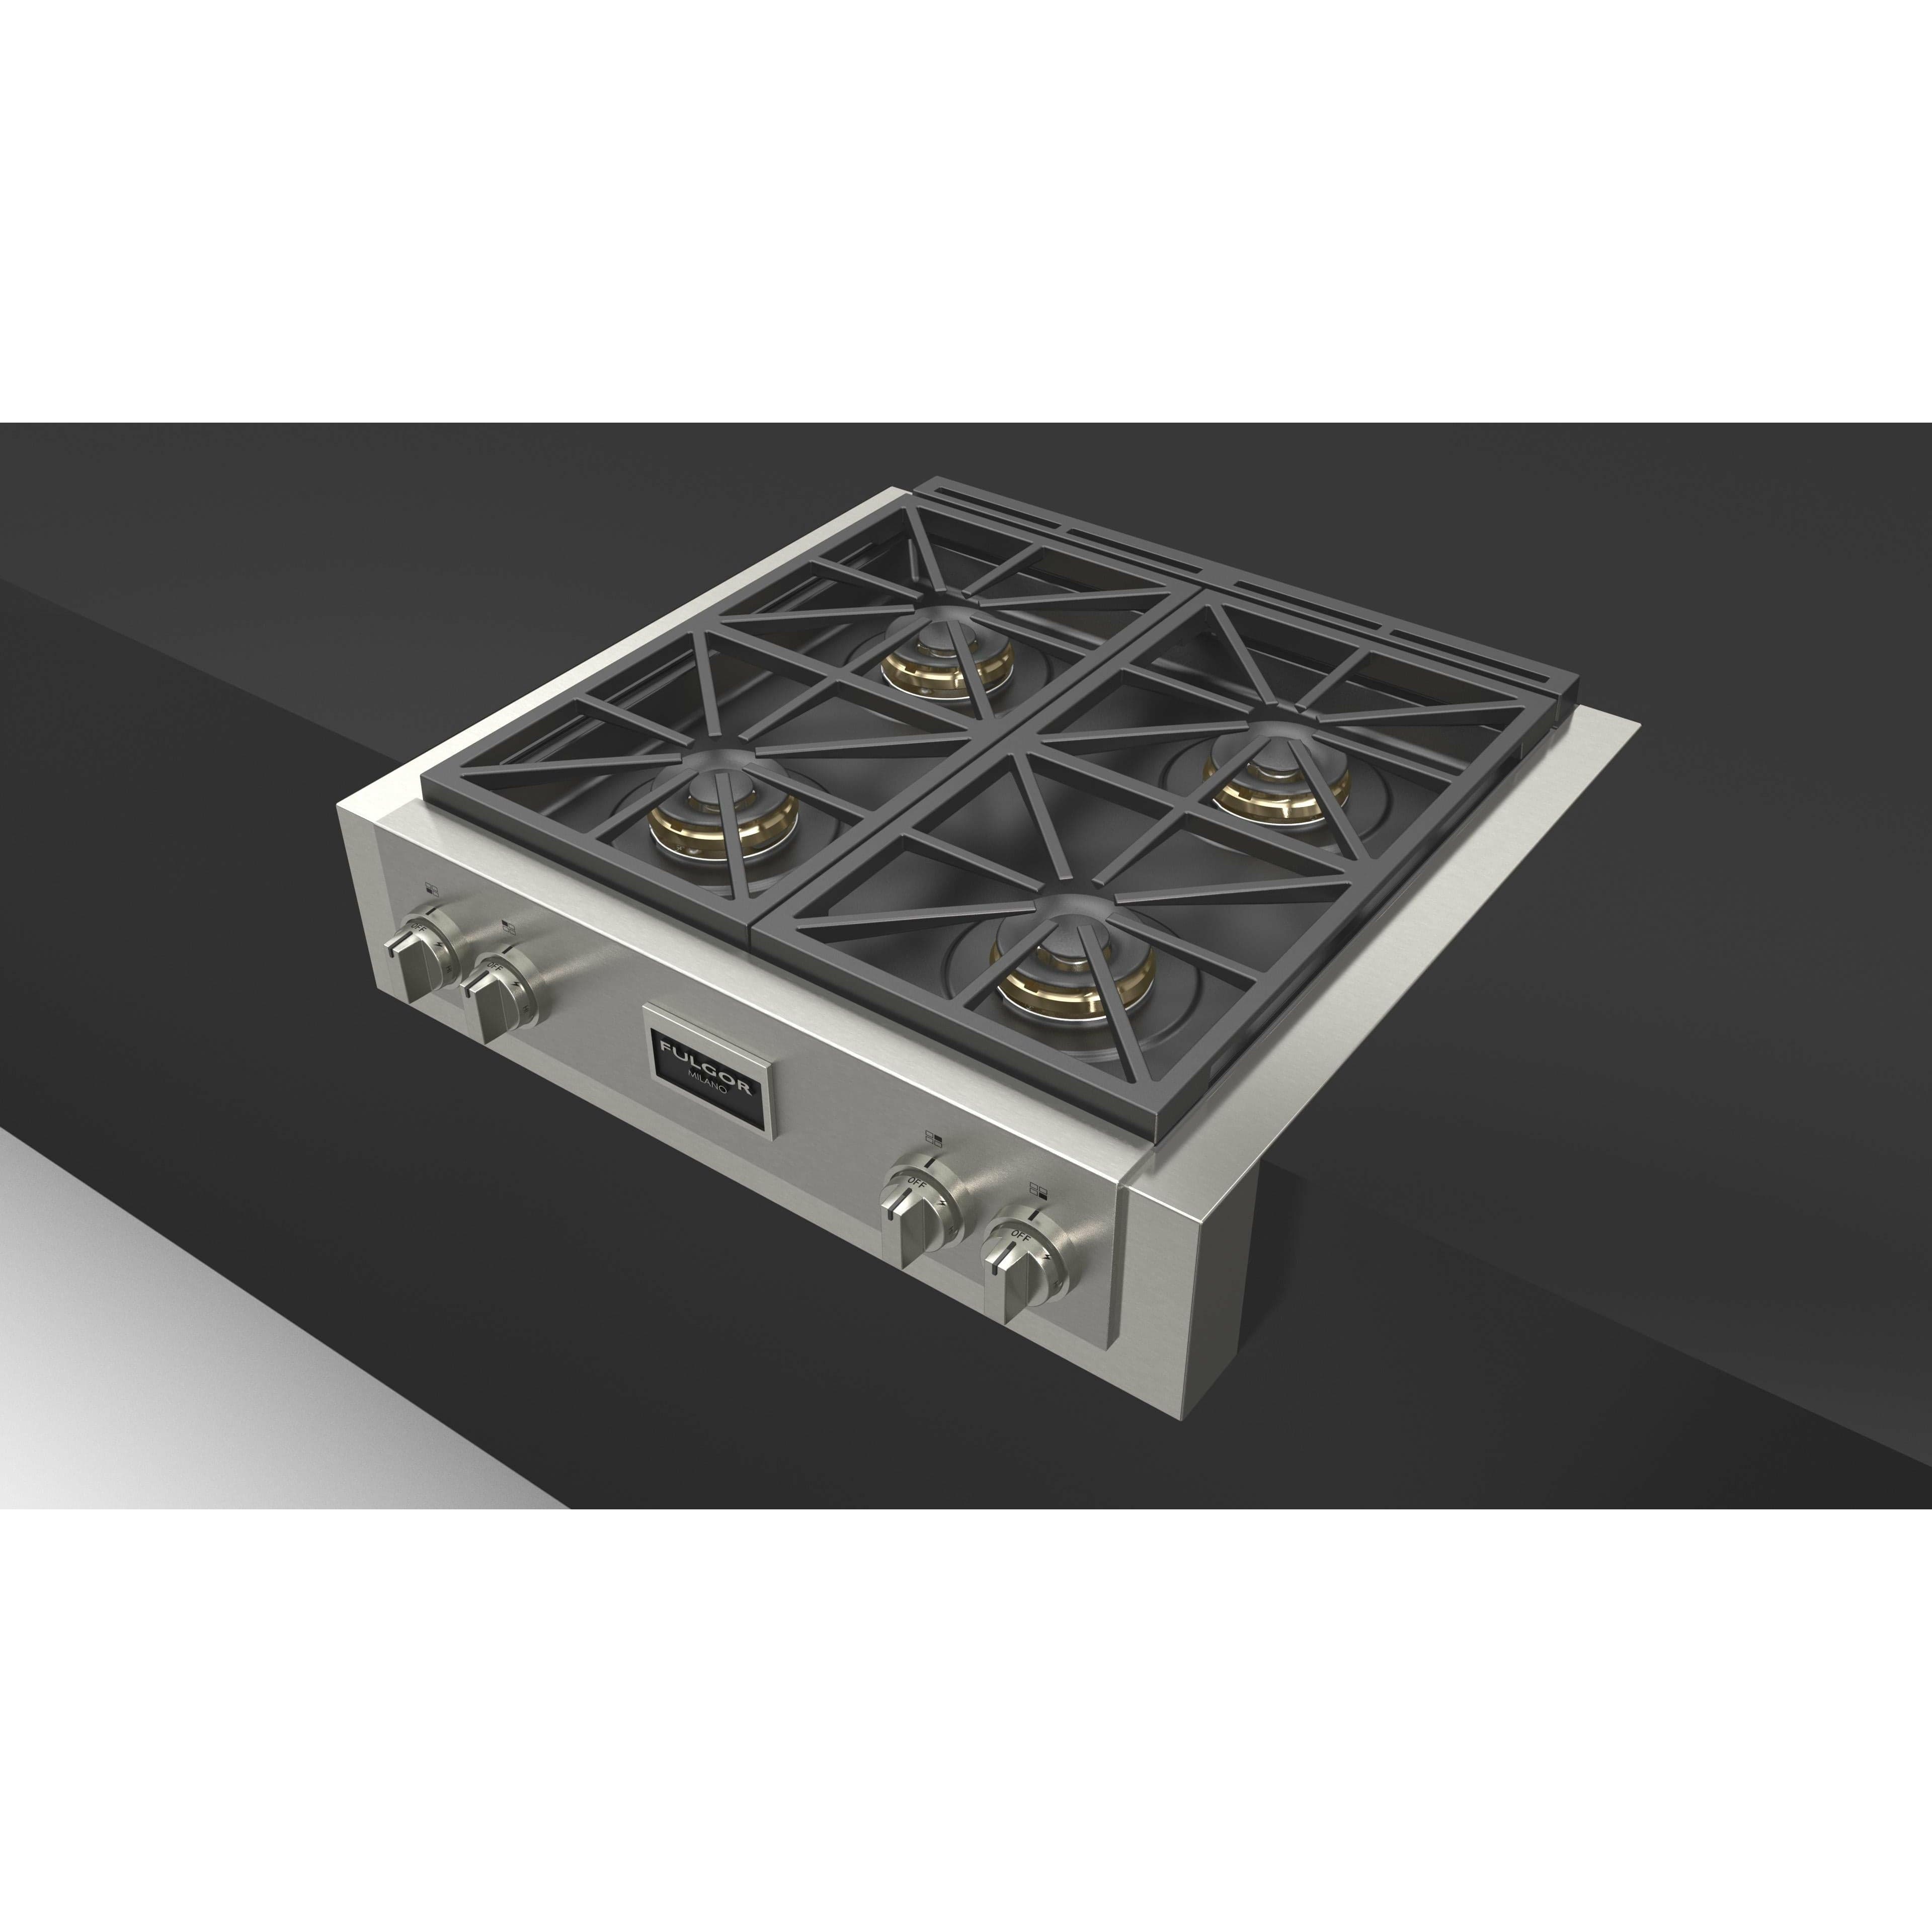 Fulgor Milano 30" Gas Rangetop with 4 Sealed Dual Flame 18,000 BTU Burners,  Stainless Steel - F6GRT304S1 Rangetop F6GRT304S1 Luxury Appliances Direct